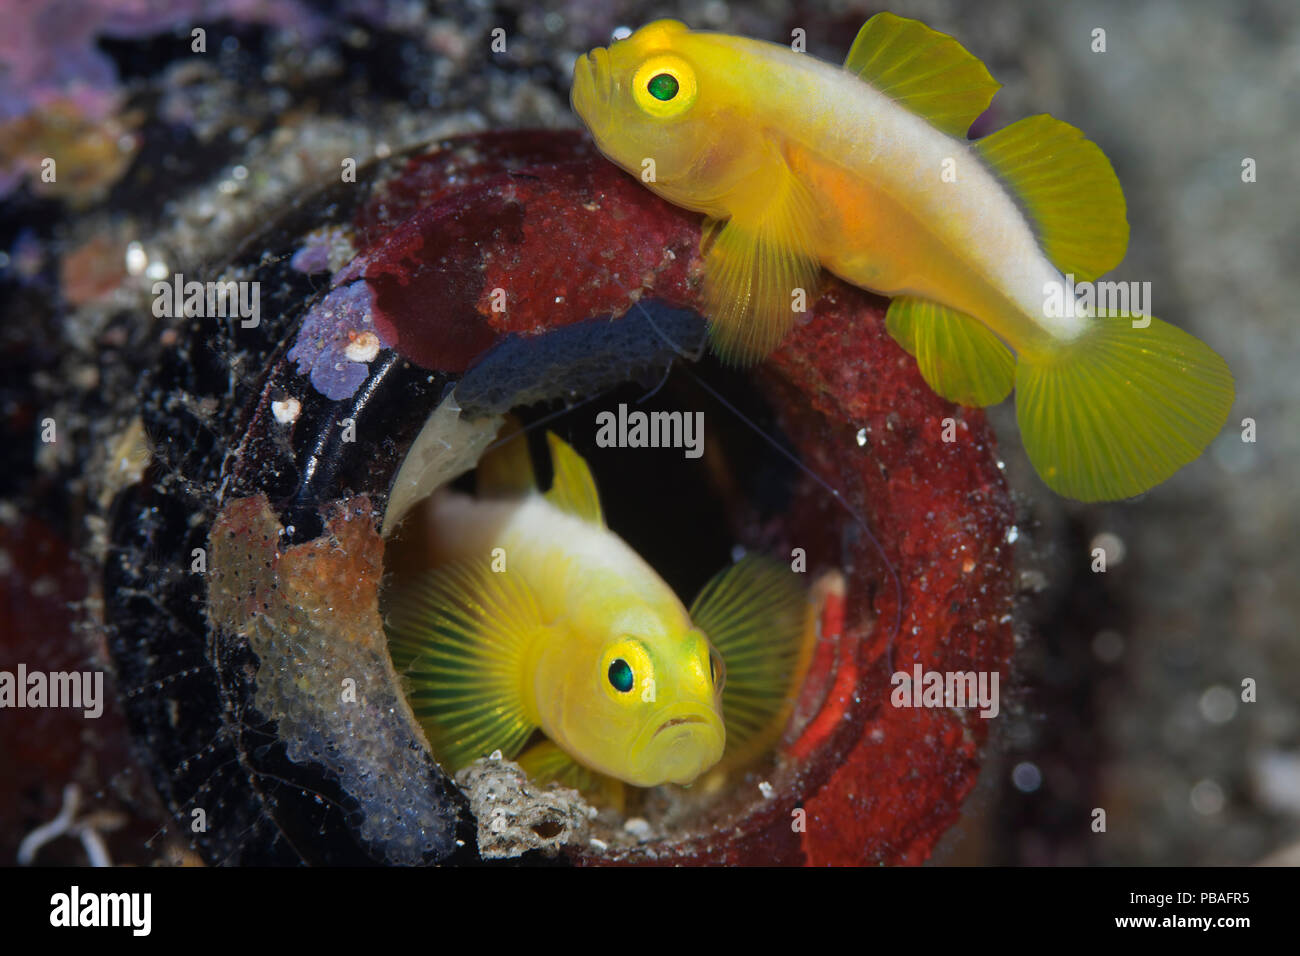 Dinah's gobies (Lubricogobius dinah) pair in their beer-bottle home, found at a depth of 30 metres at Observation Point in Milne Bay Province, Papua New Guinea Stock Photo